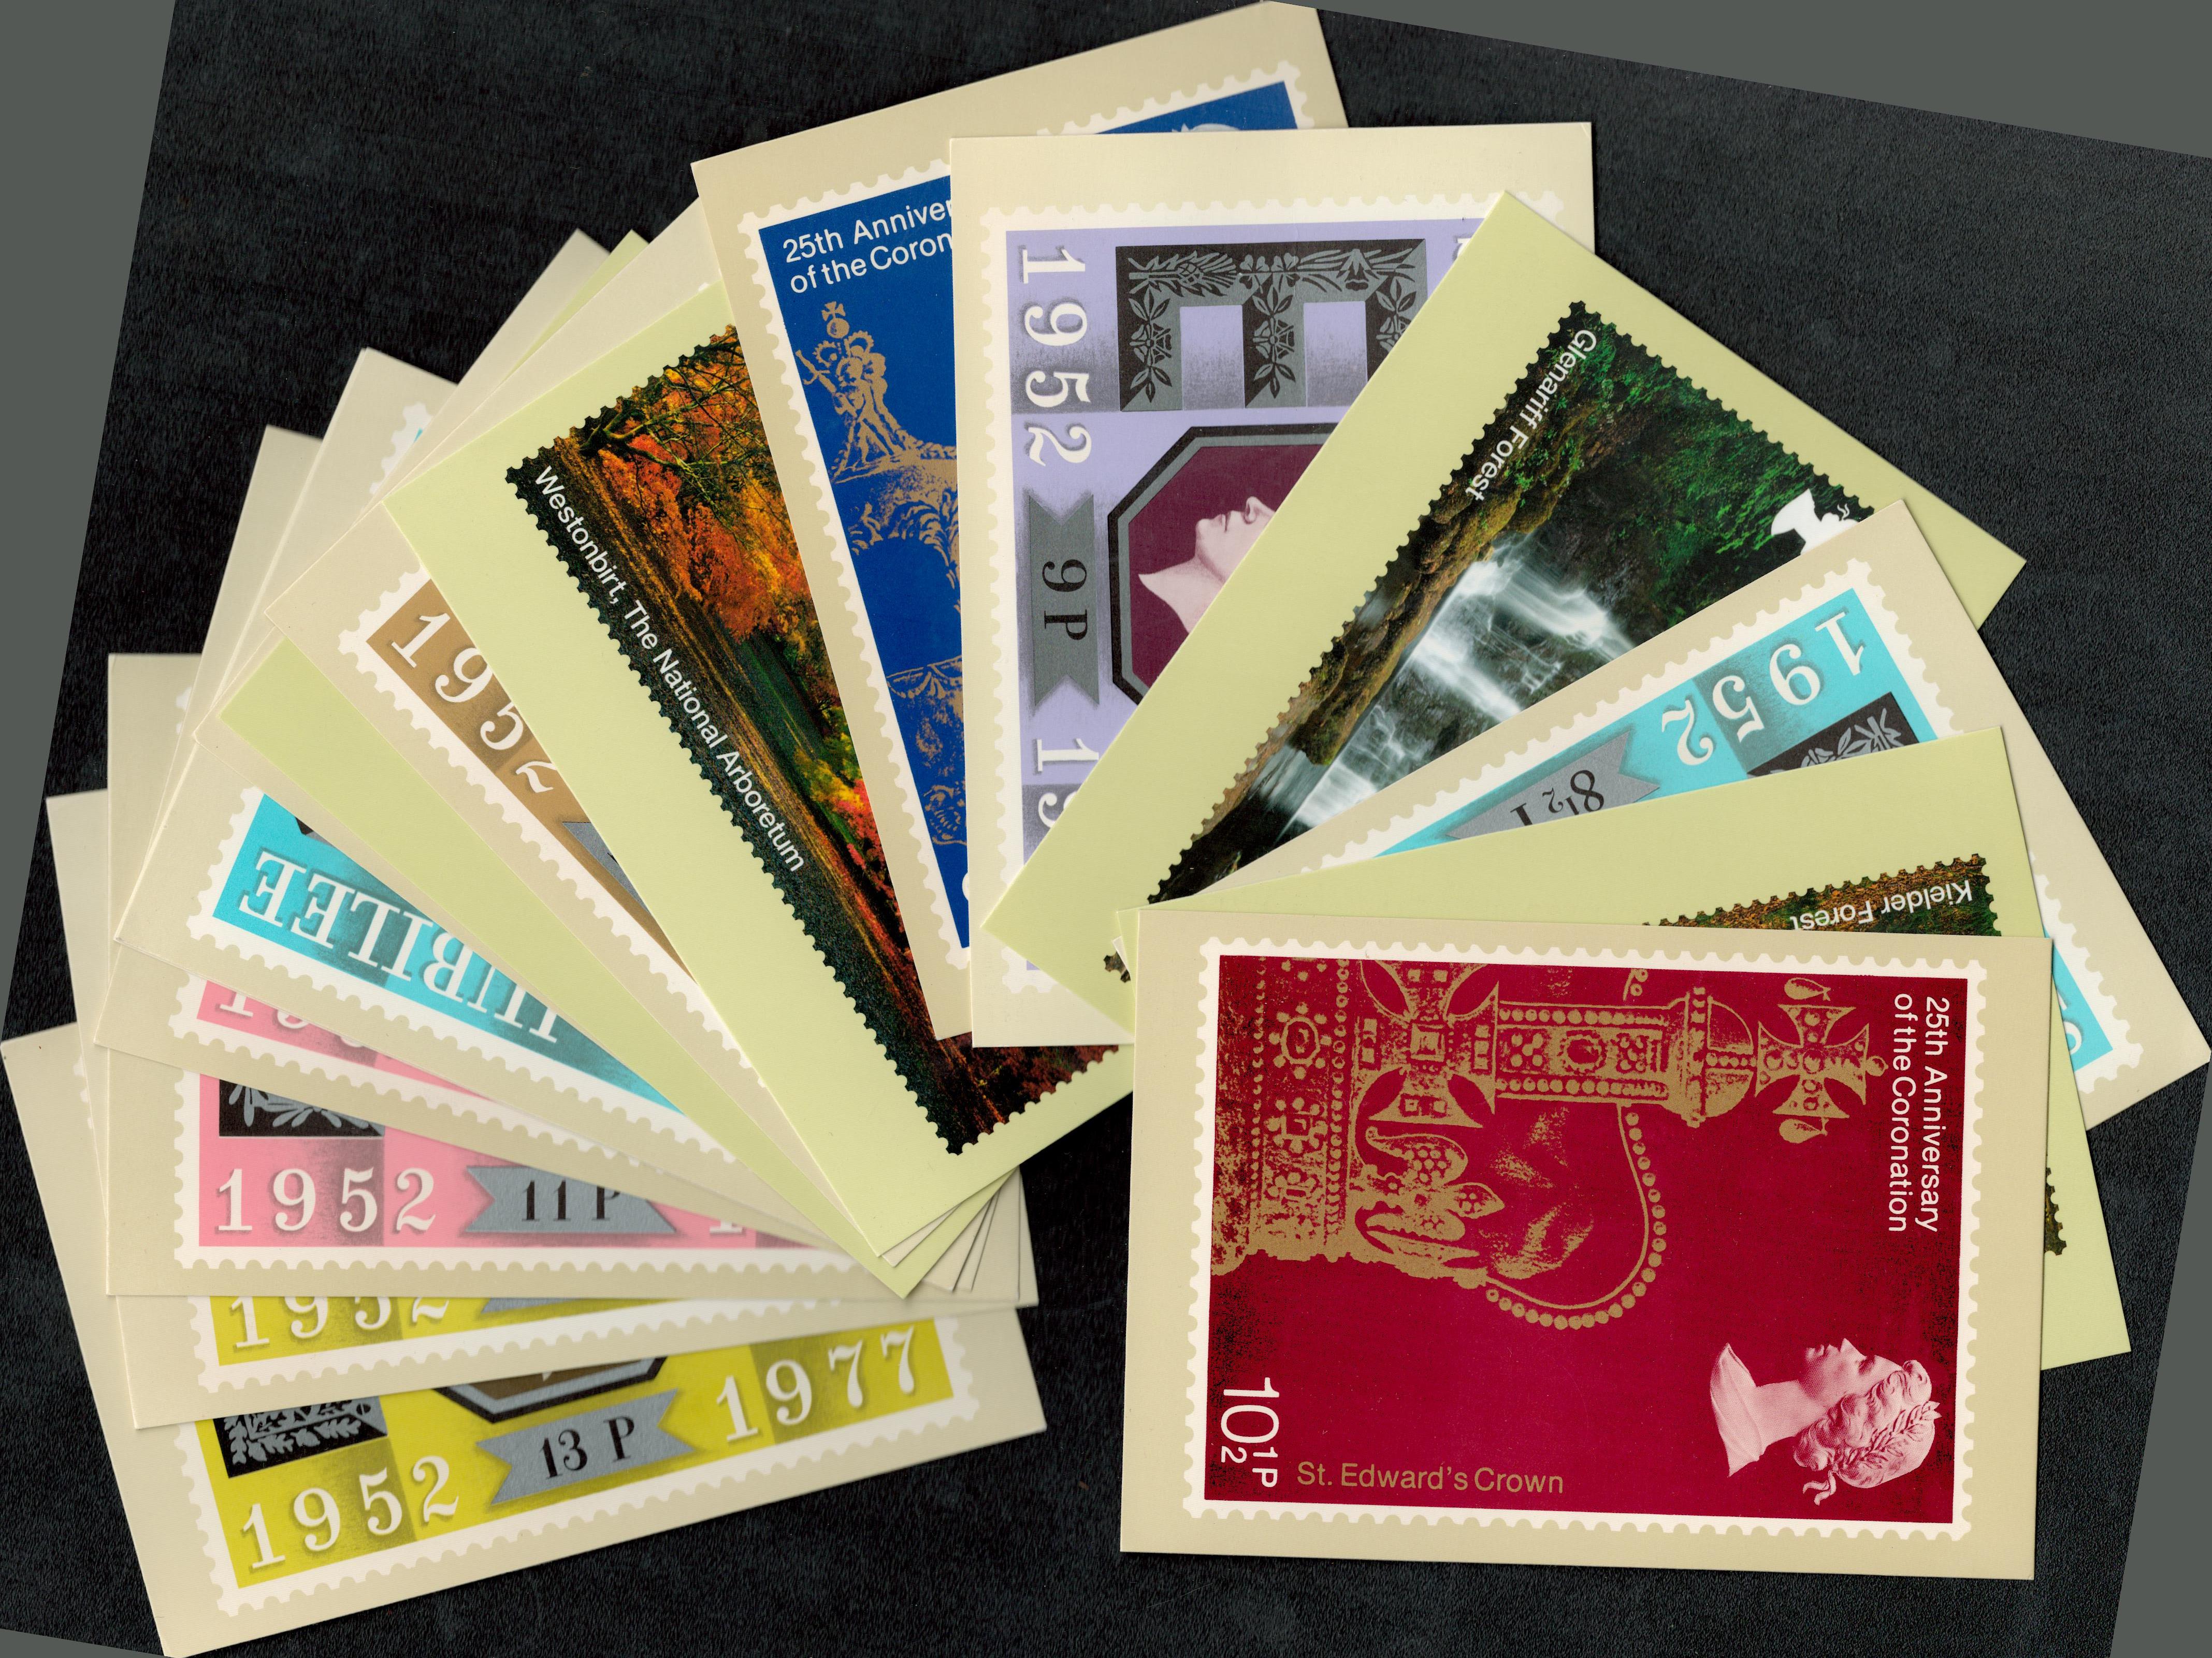 Postcard Roy mail collection includes Silver Jubilee, 25th Anniversary of the Coronation, Forests.